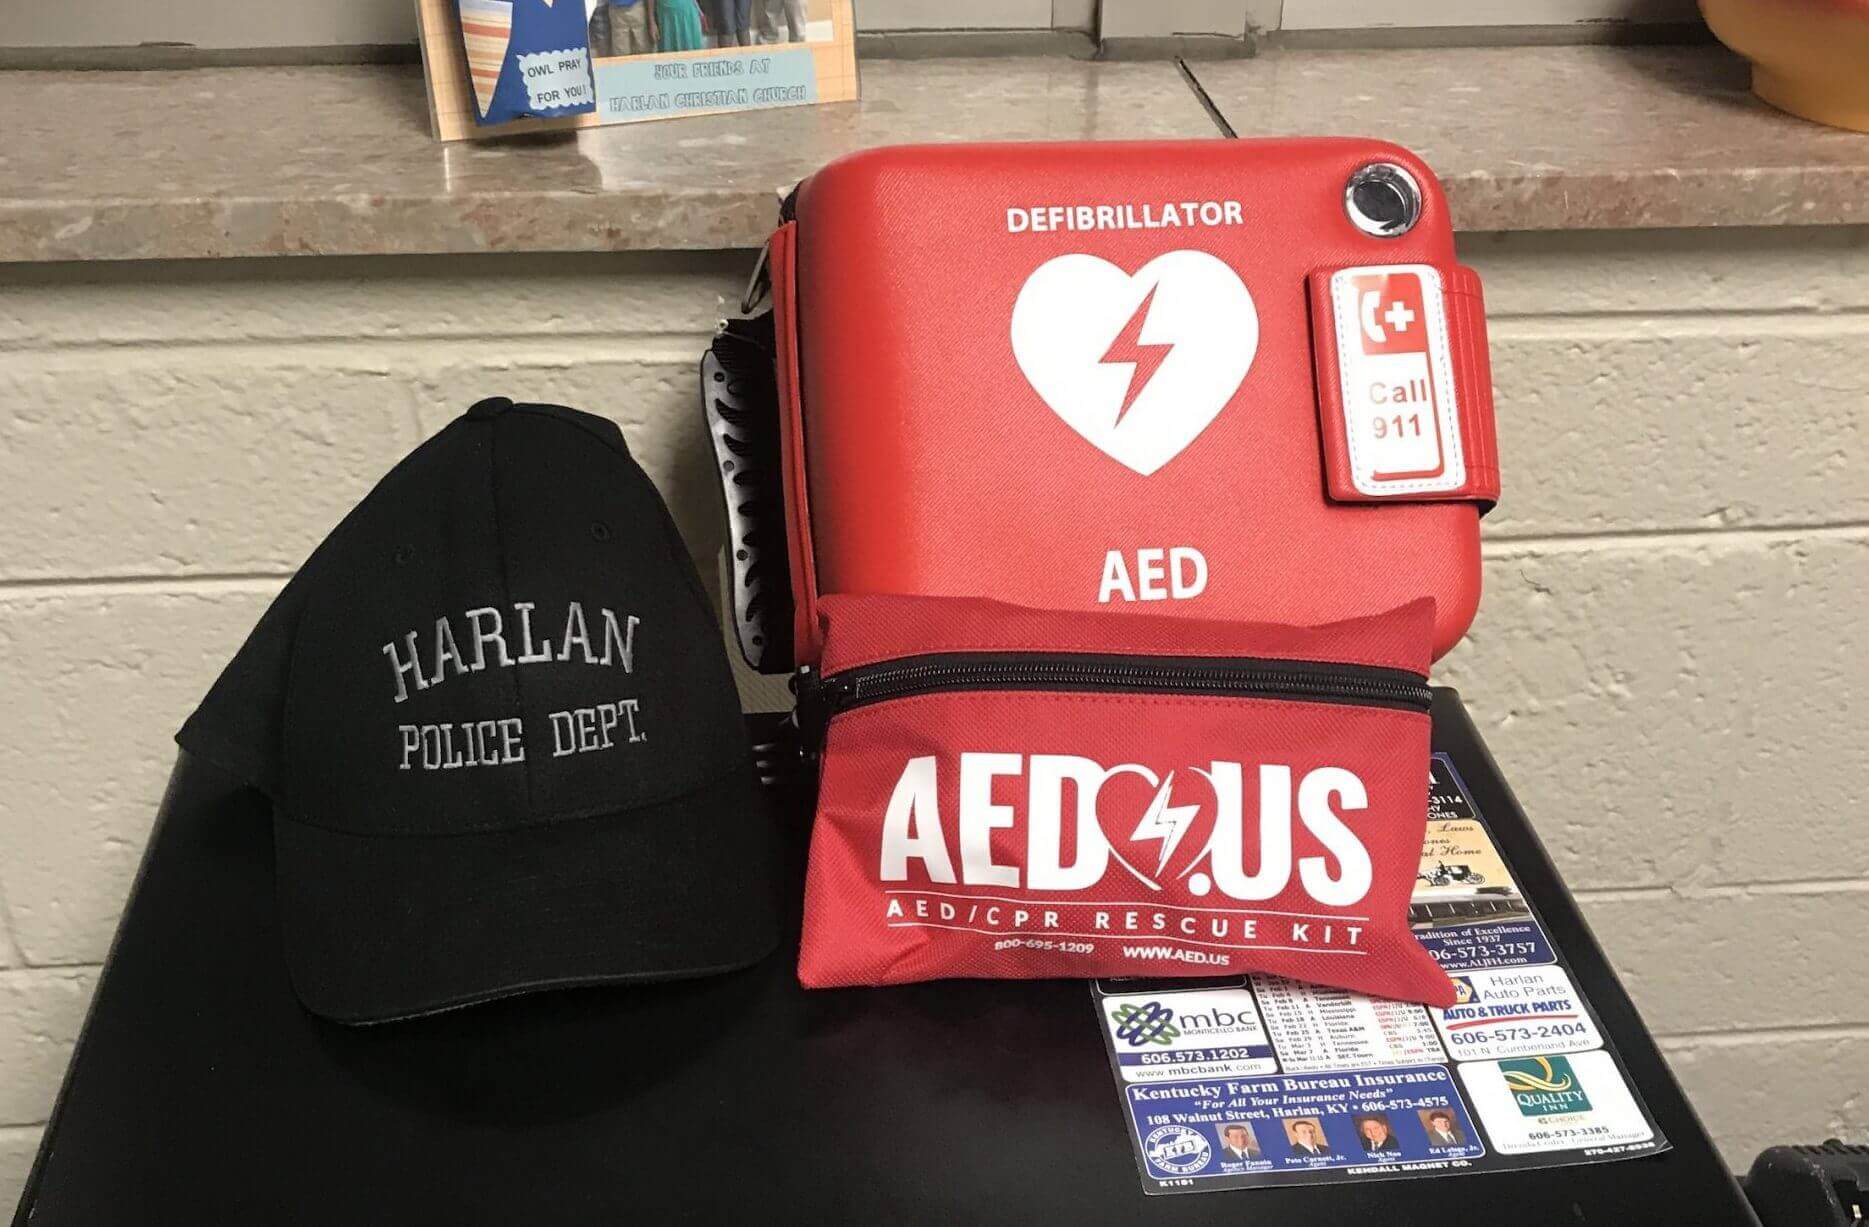 AED donated to Harlan Police Department by AED.us